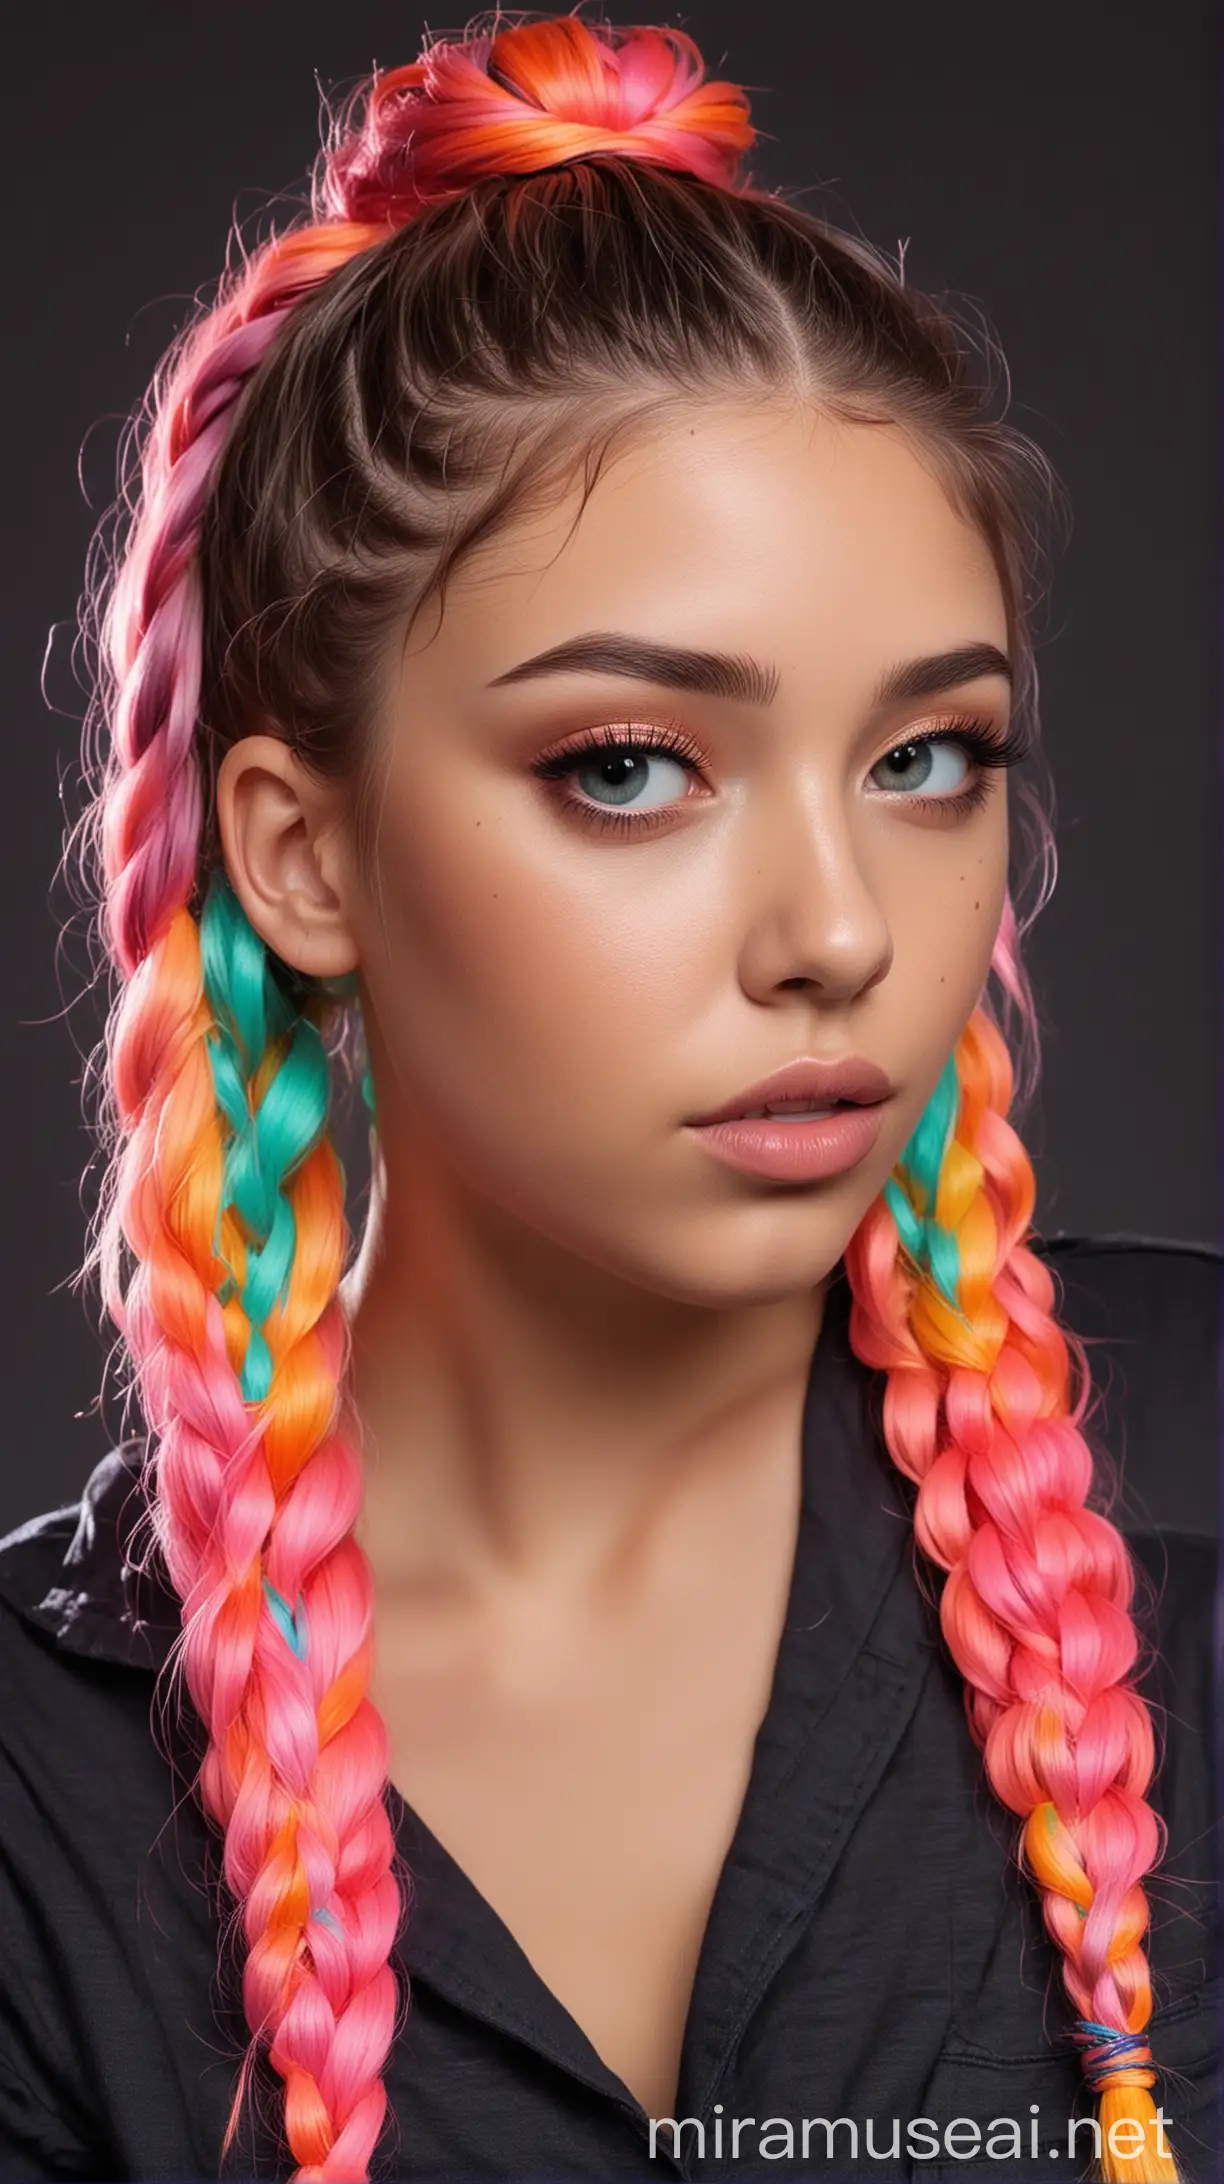 Vibrant Neon Braided Hairstyle for PartyReady Women